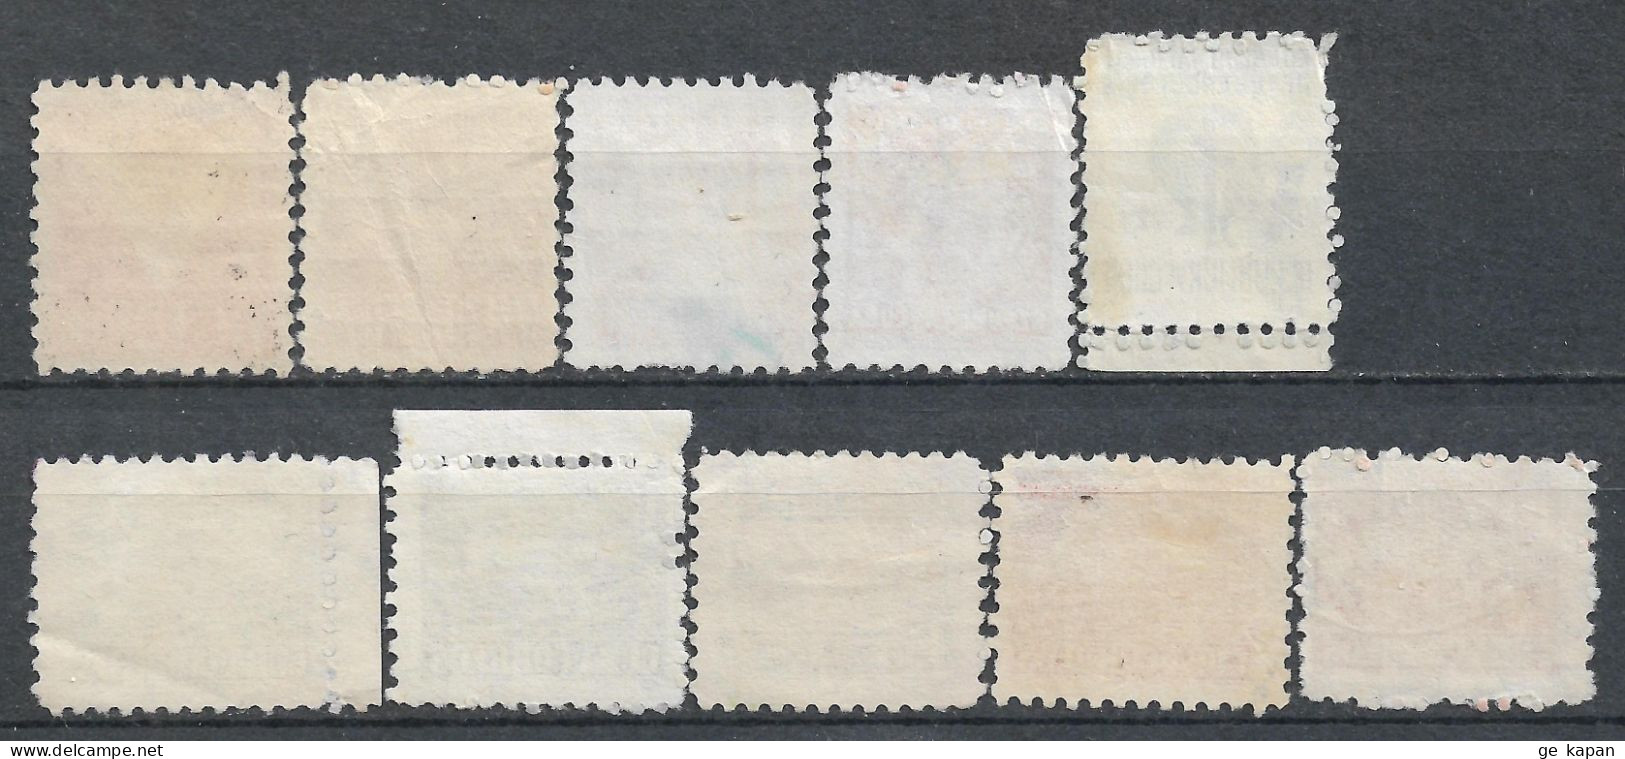 1942-1957 CUBA Postal Tax Lot Of 26 Used Stamps (Michel # 6,10,11,16,21,22,34X) CV €7.80 - Used Stamps